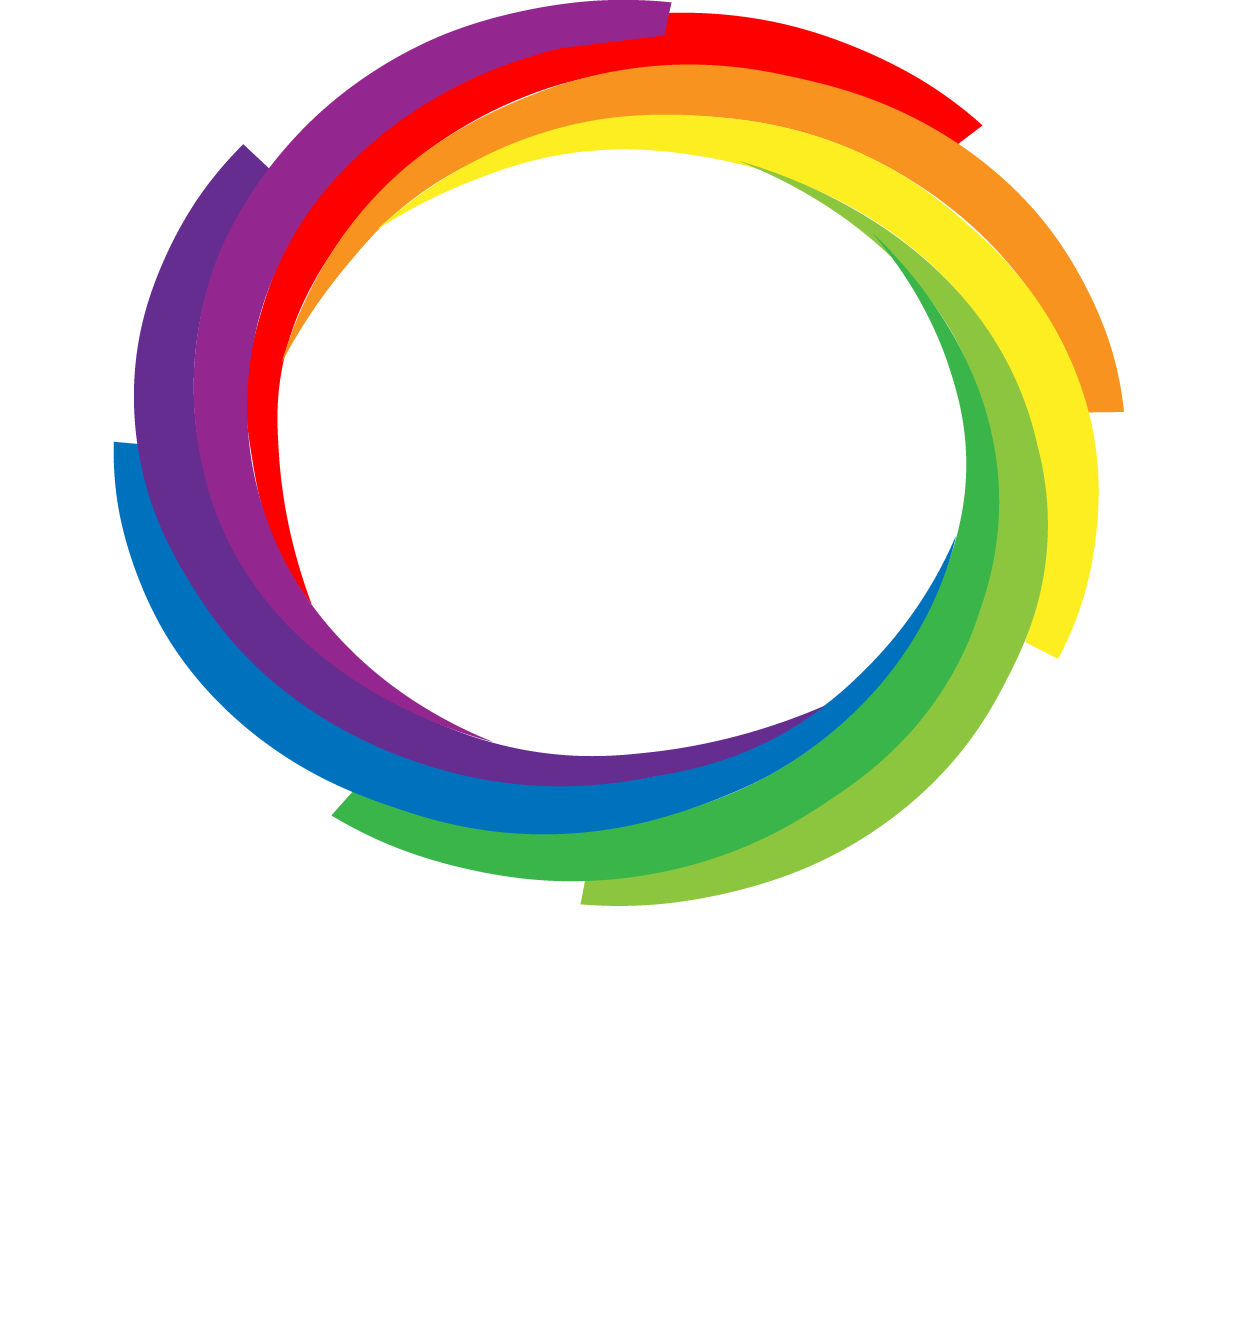 One Action Foundation